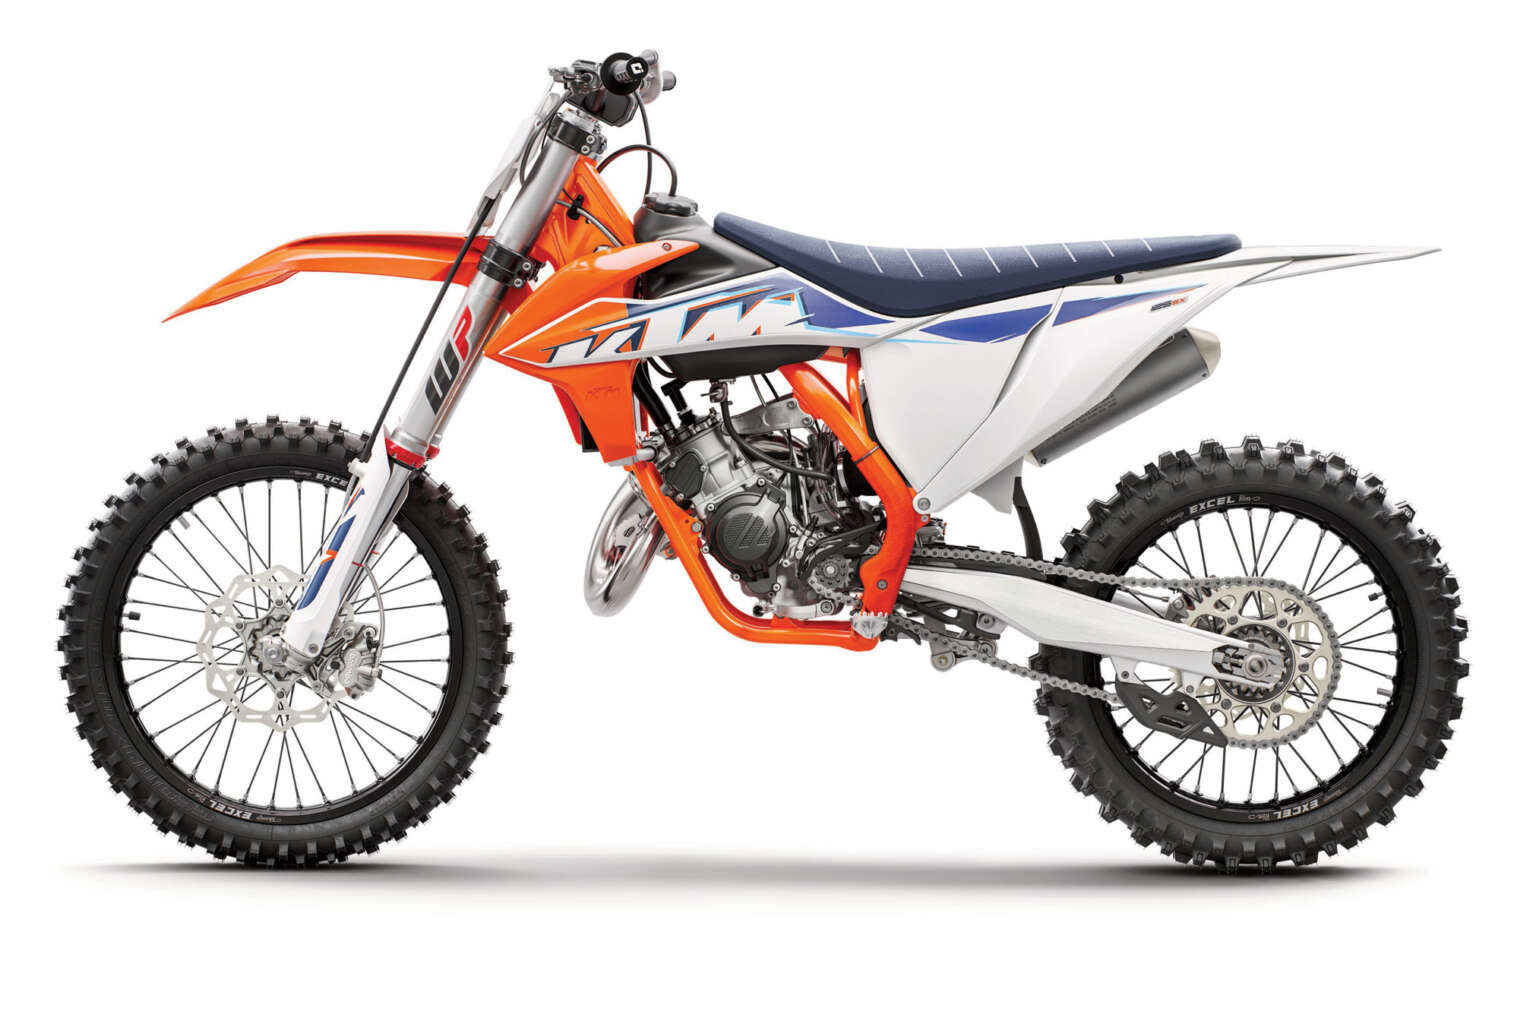 2022 KTM 125 SX Guide • Total Motorcycle